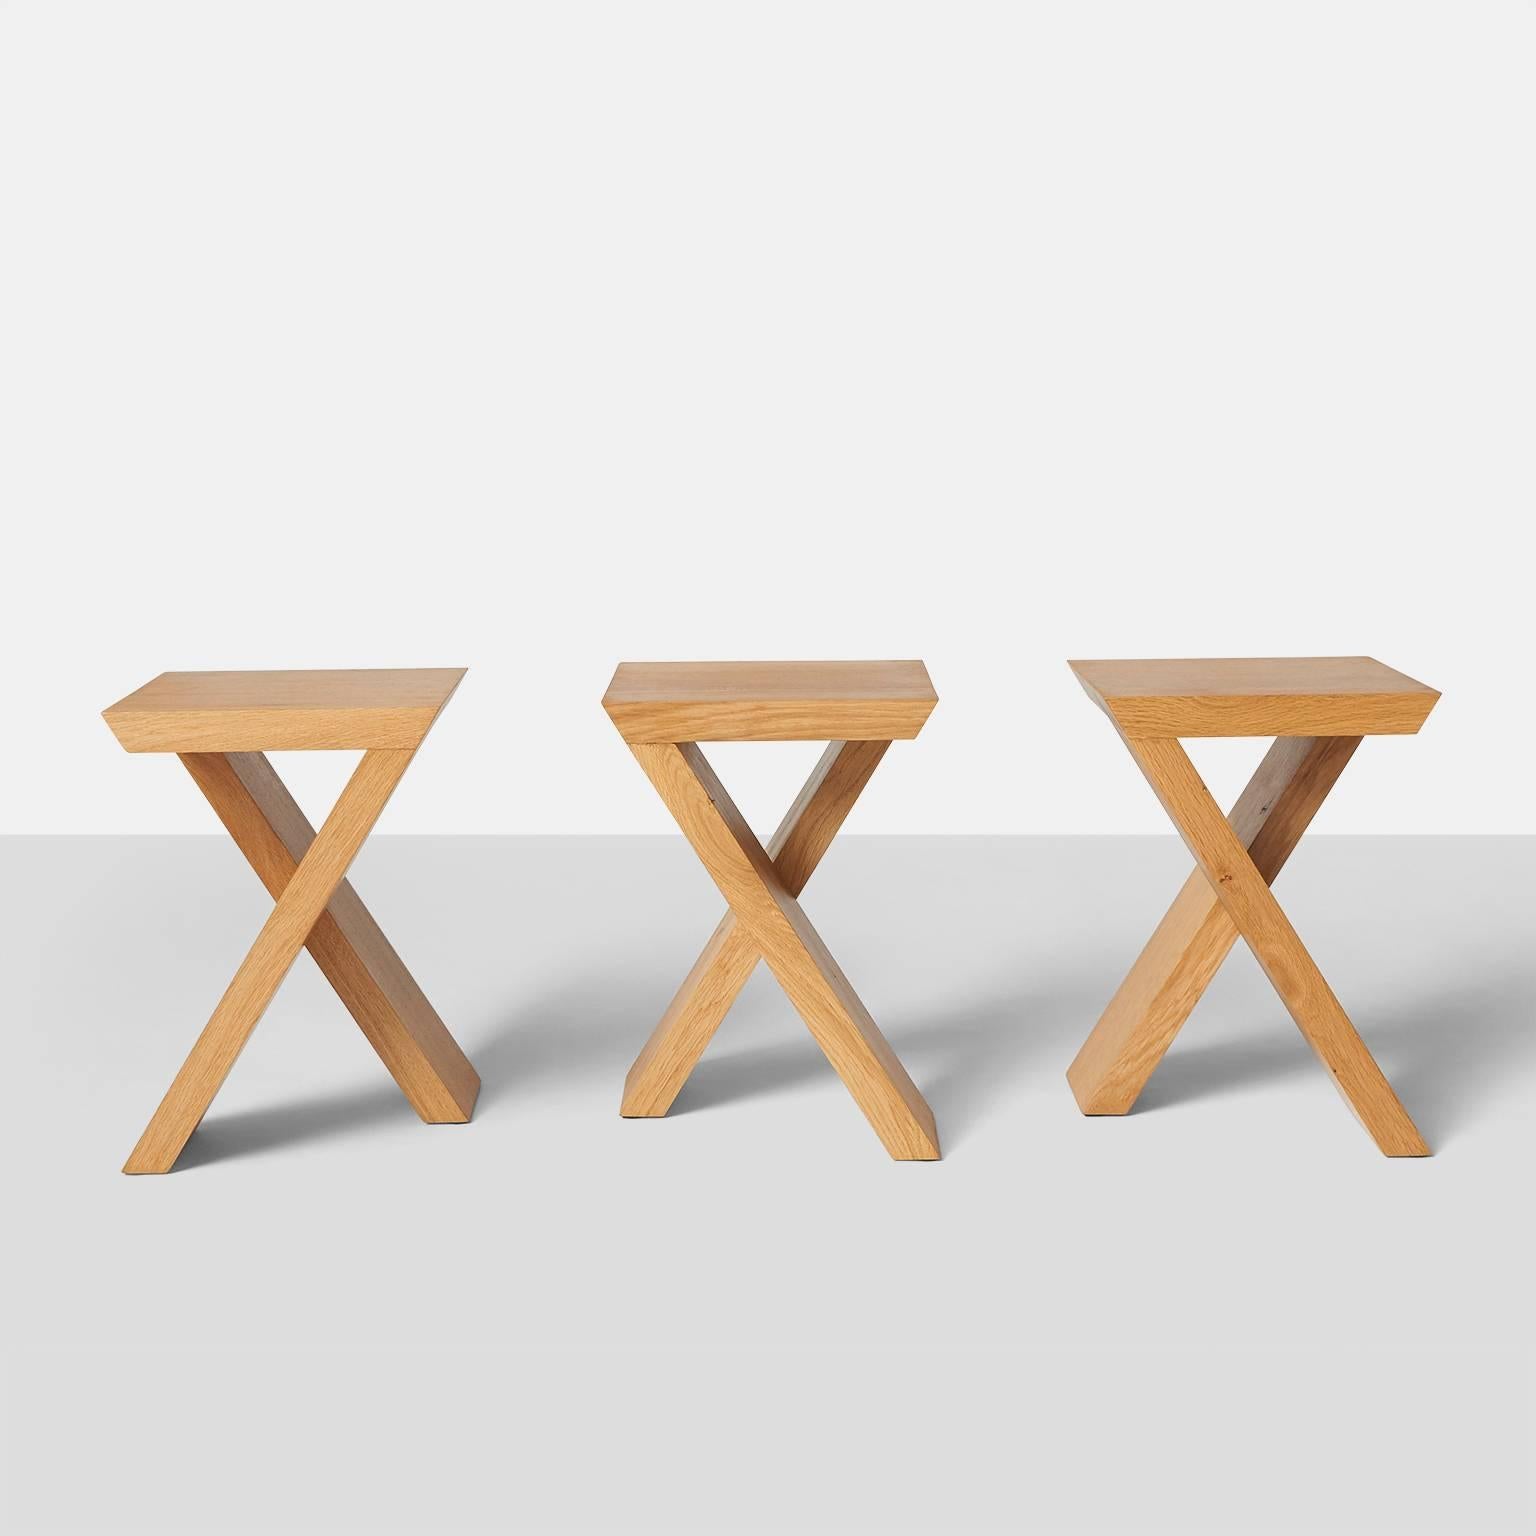 A group of three stools with mitered edge made of naturally fallen oak by Kaspar Hamacher. Almond & Company is the exclusive gallery in the U.S. to represent this artist.